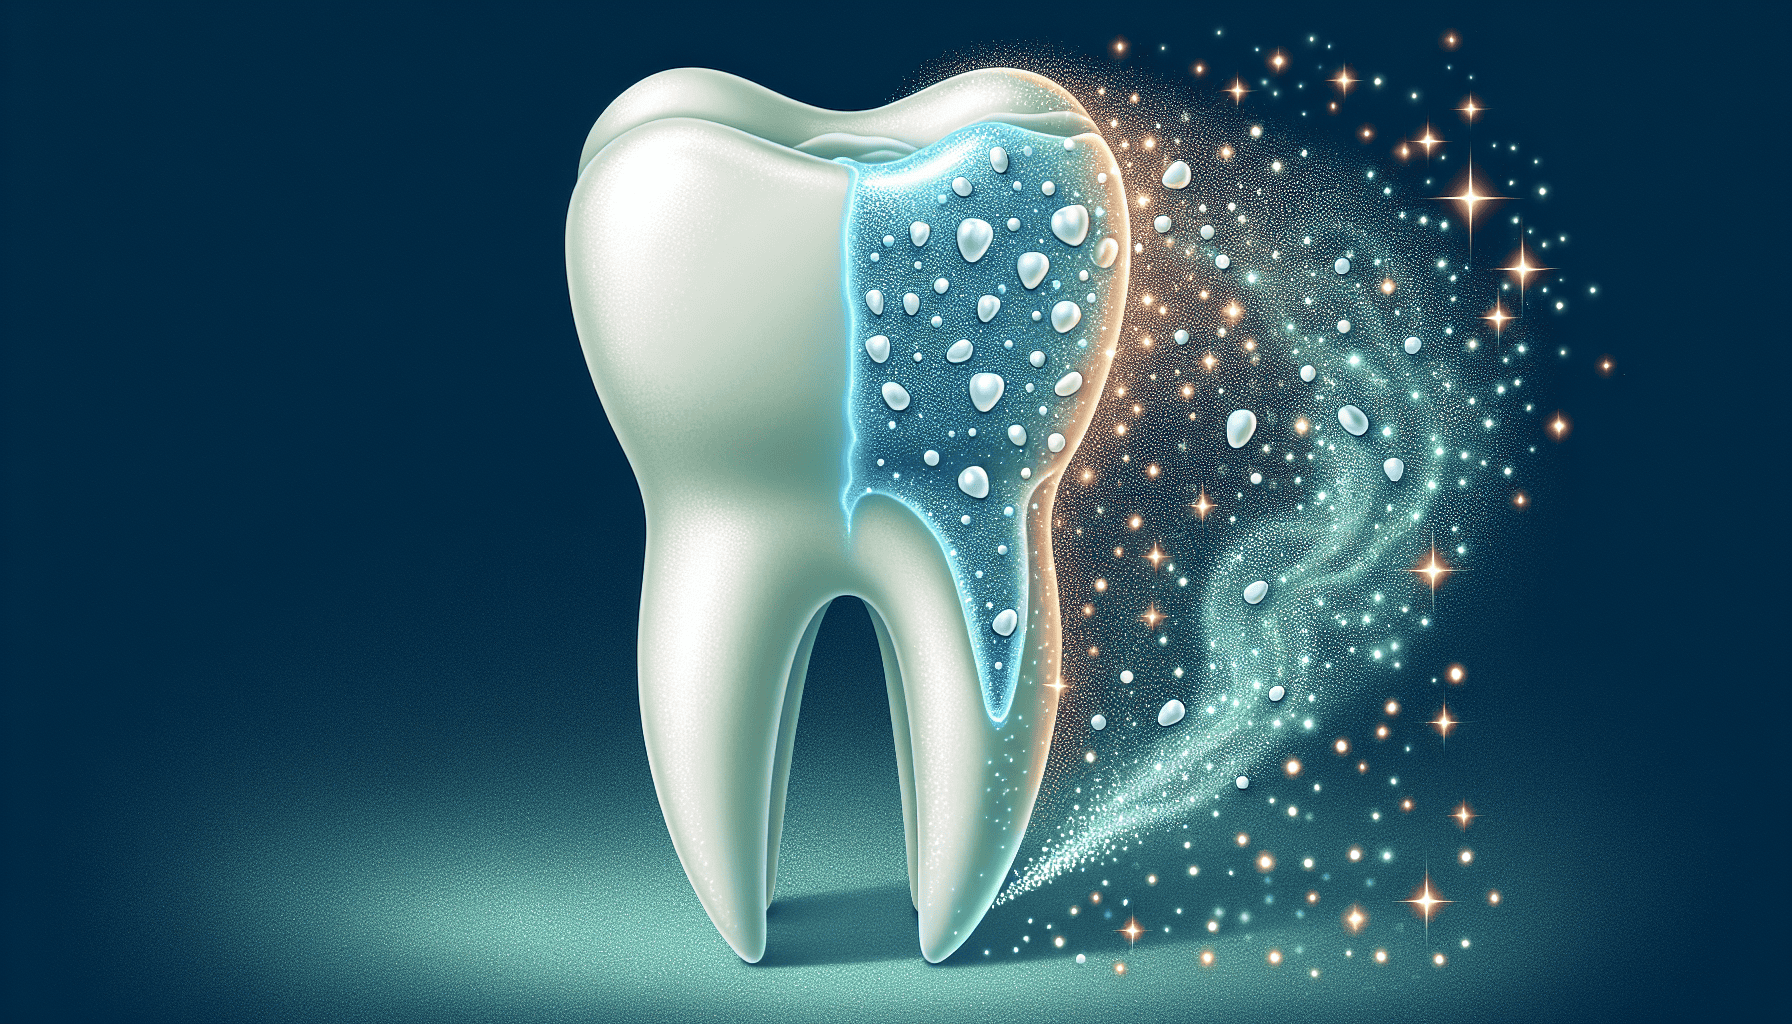 Illustration of targeting tooth decay with ozone therapy